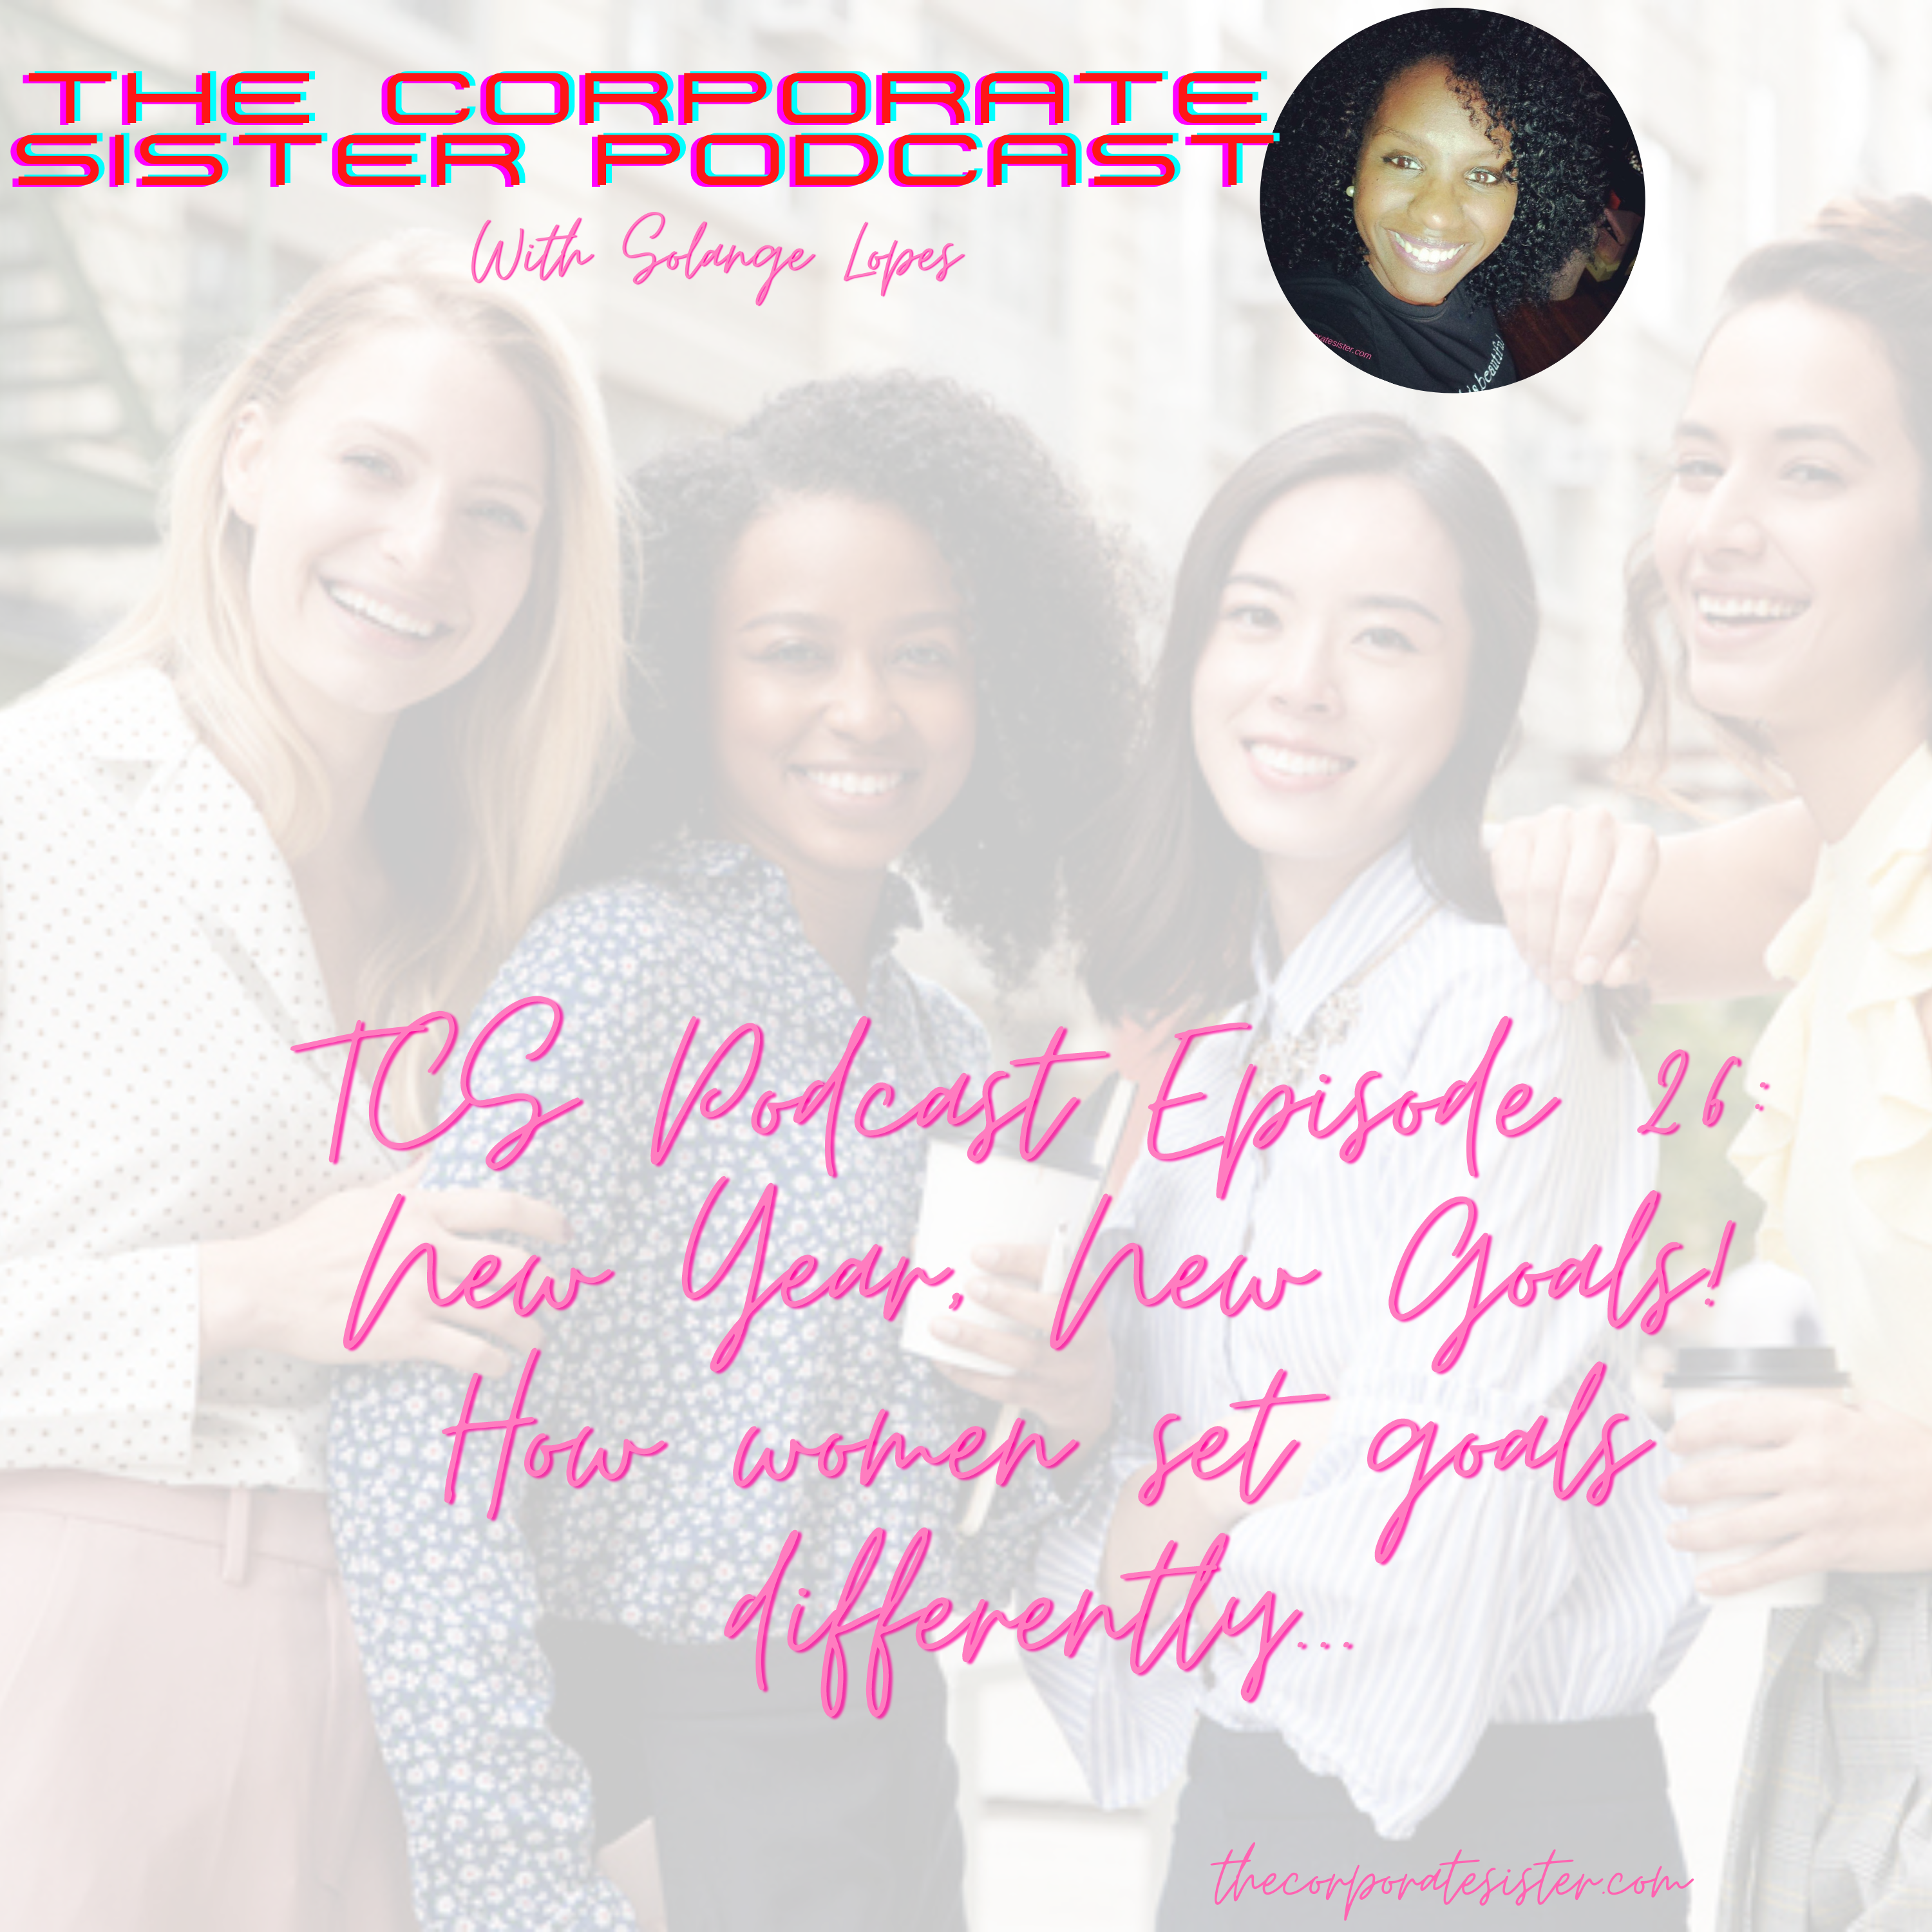 TCS Podcast Episode 26: New Year, New Goals! How women set goals differently...